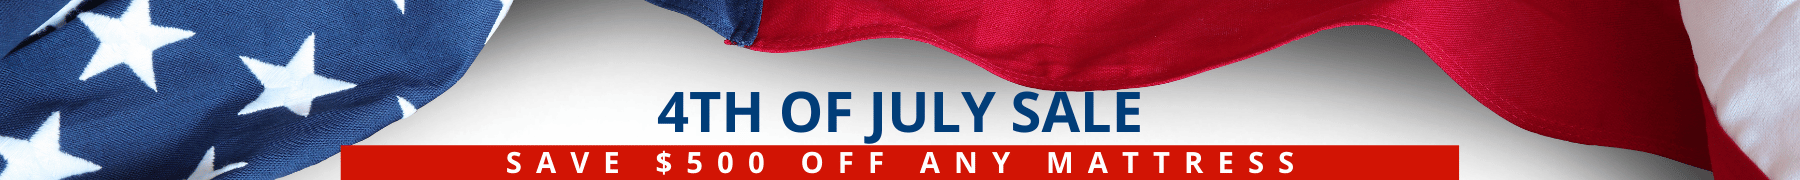 4th of July Sale - Save $500 Off Any Mattress